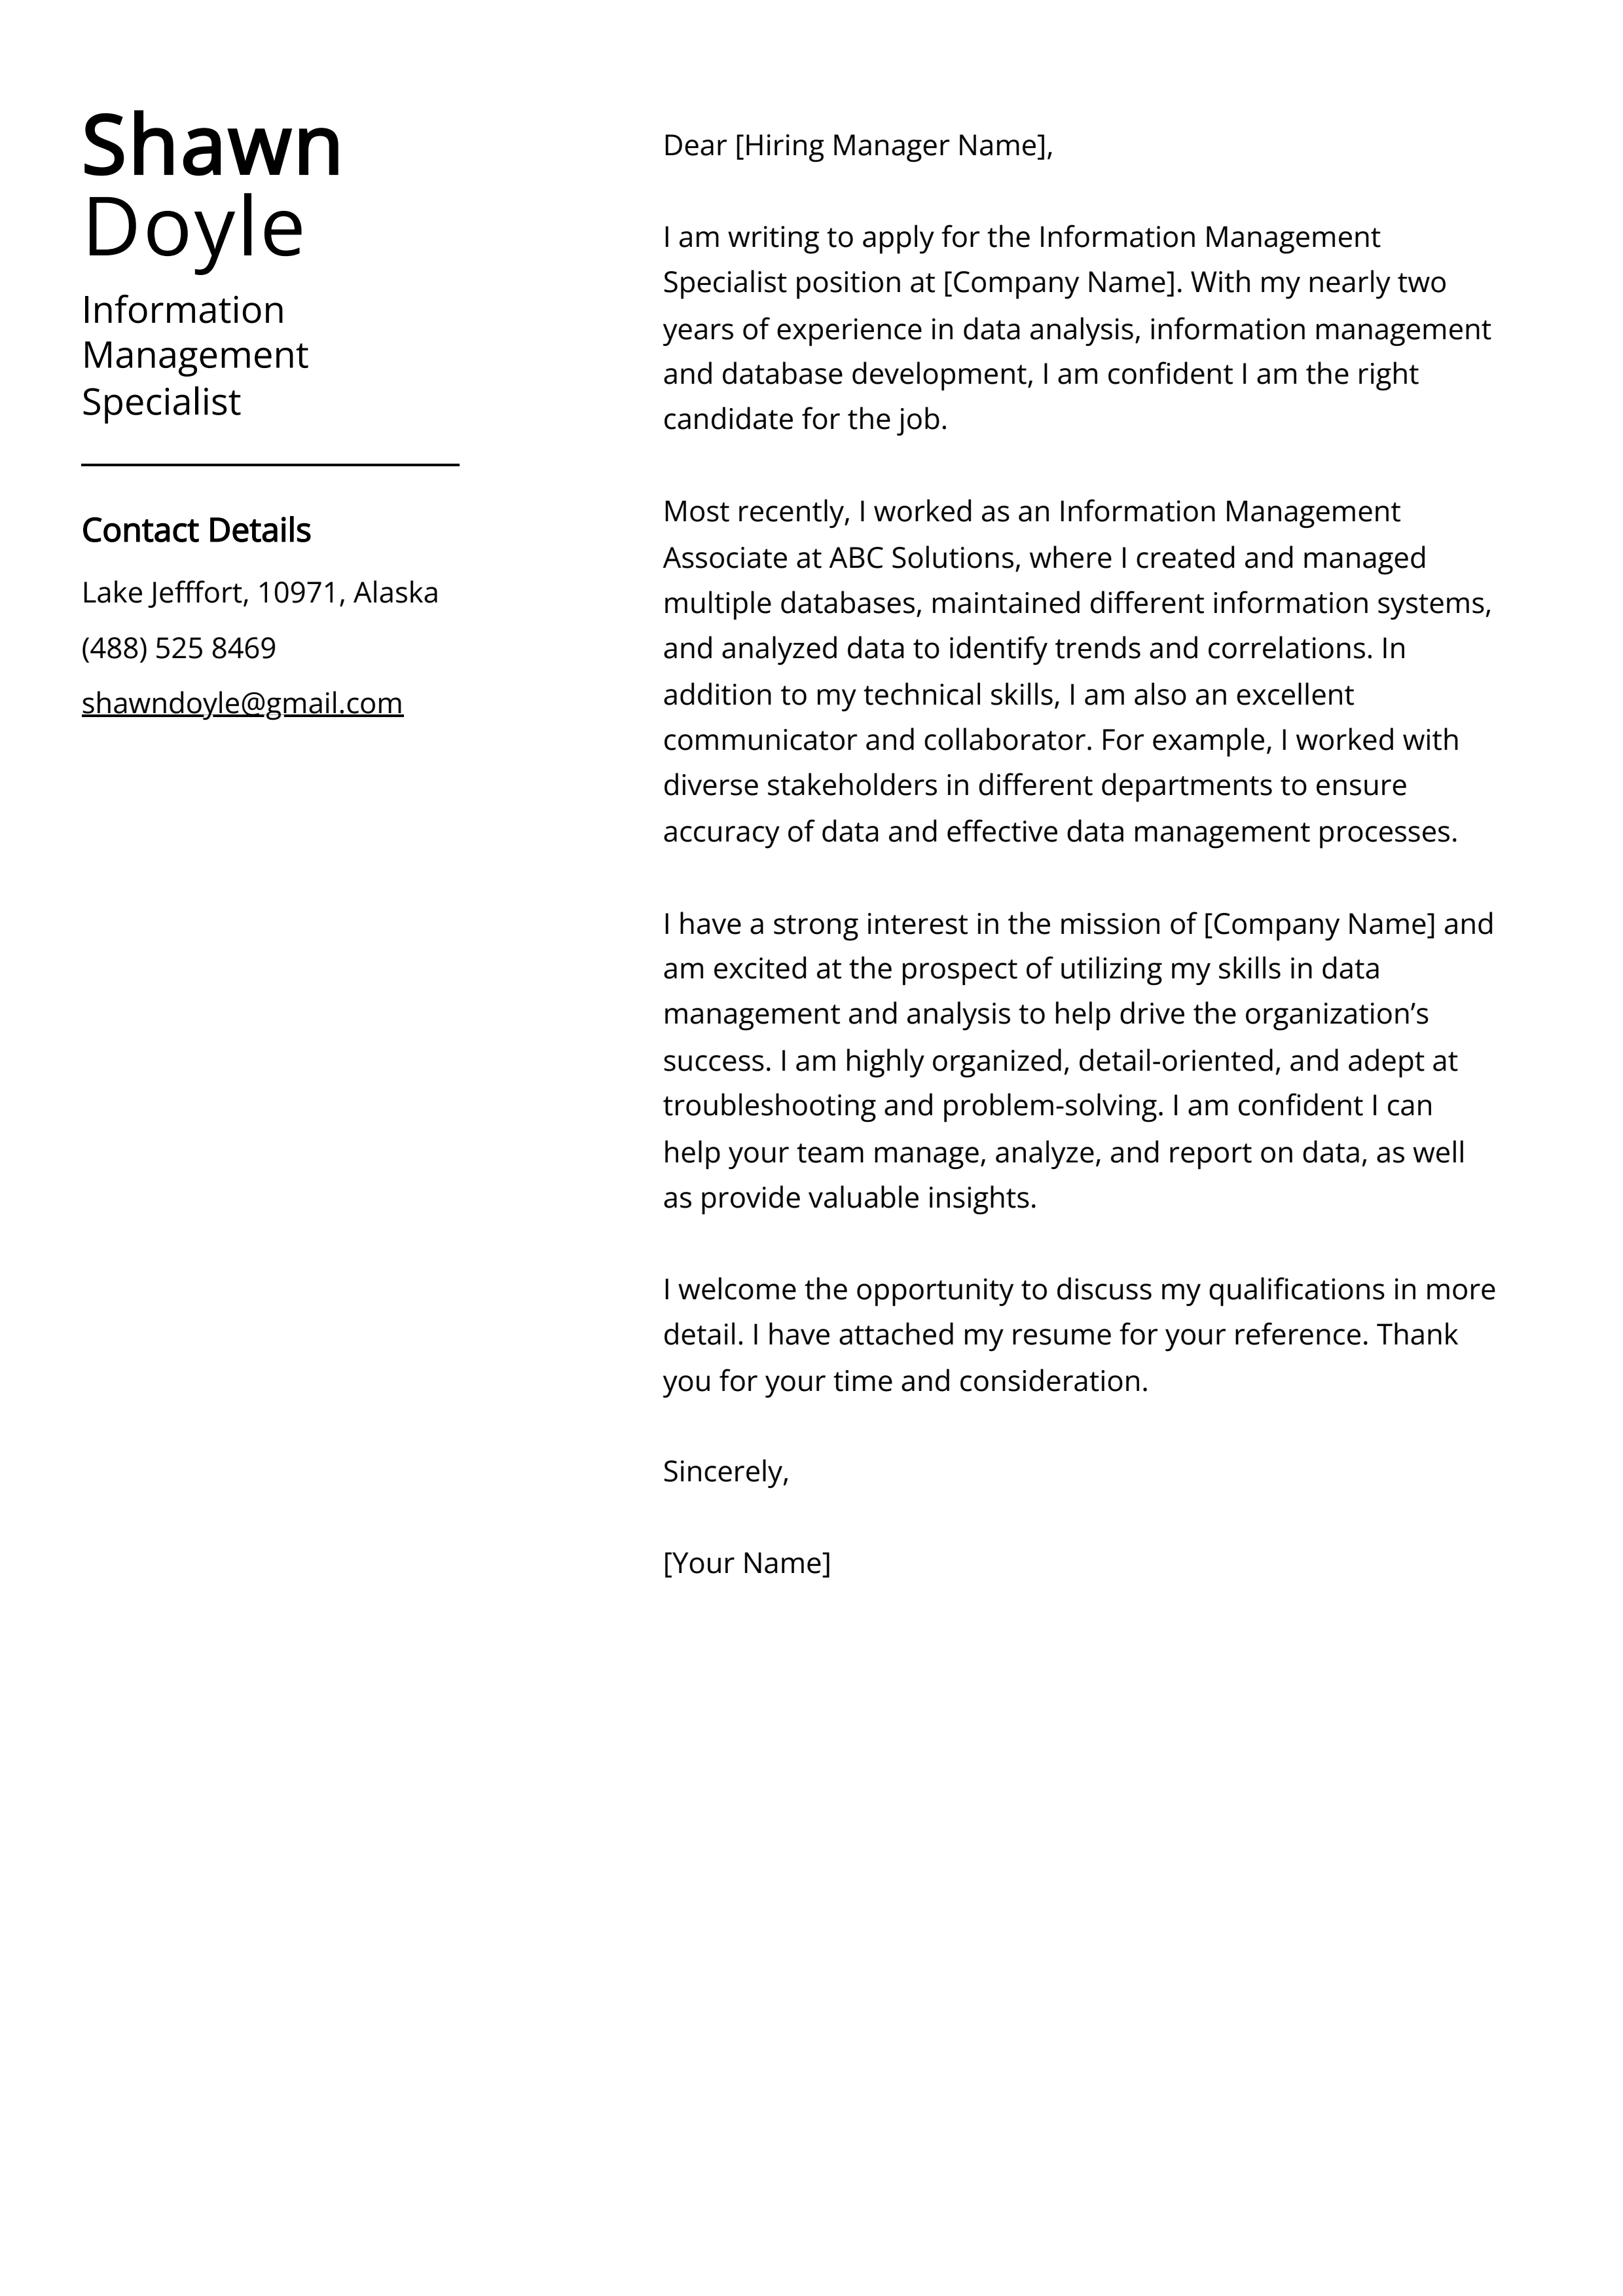 Information Management Specialist Cover Letter Example